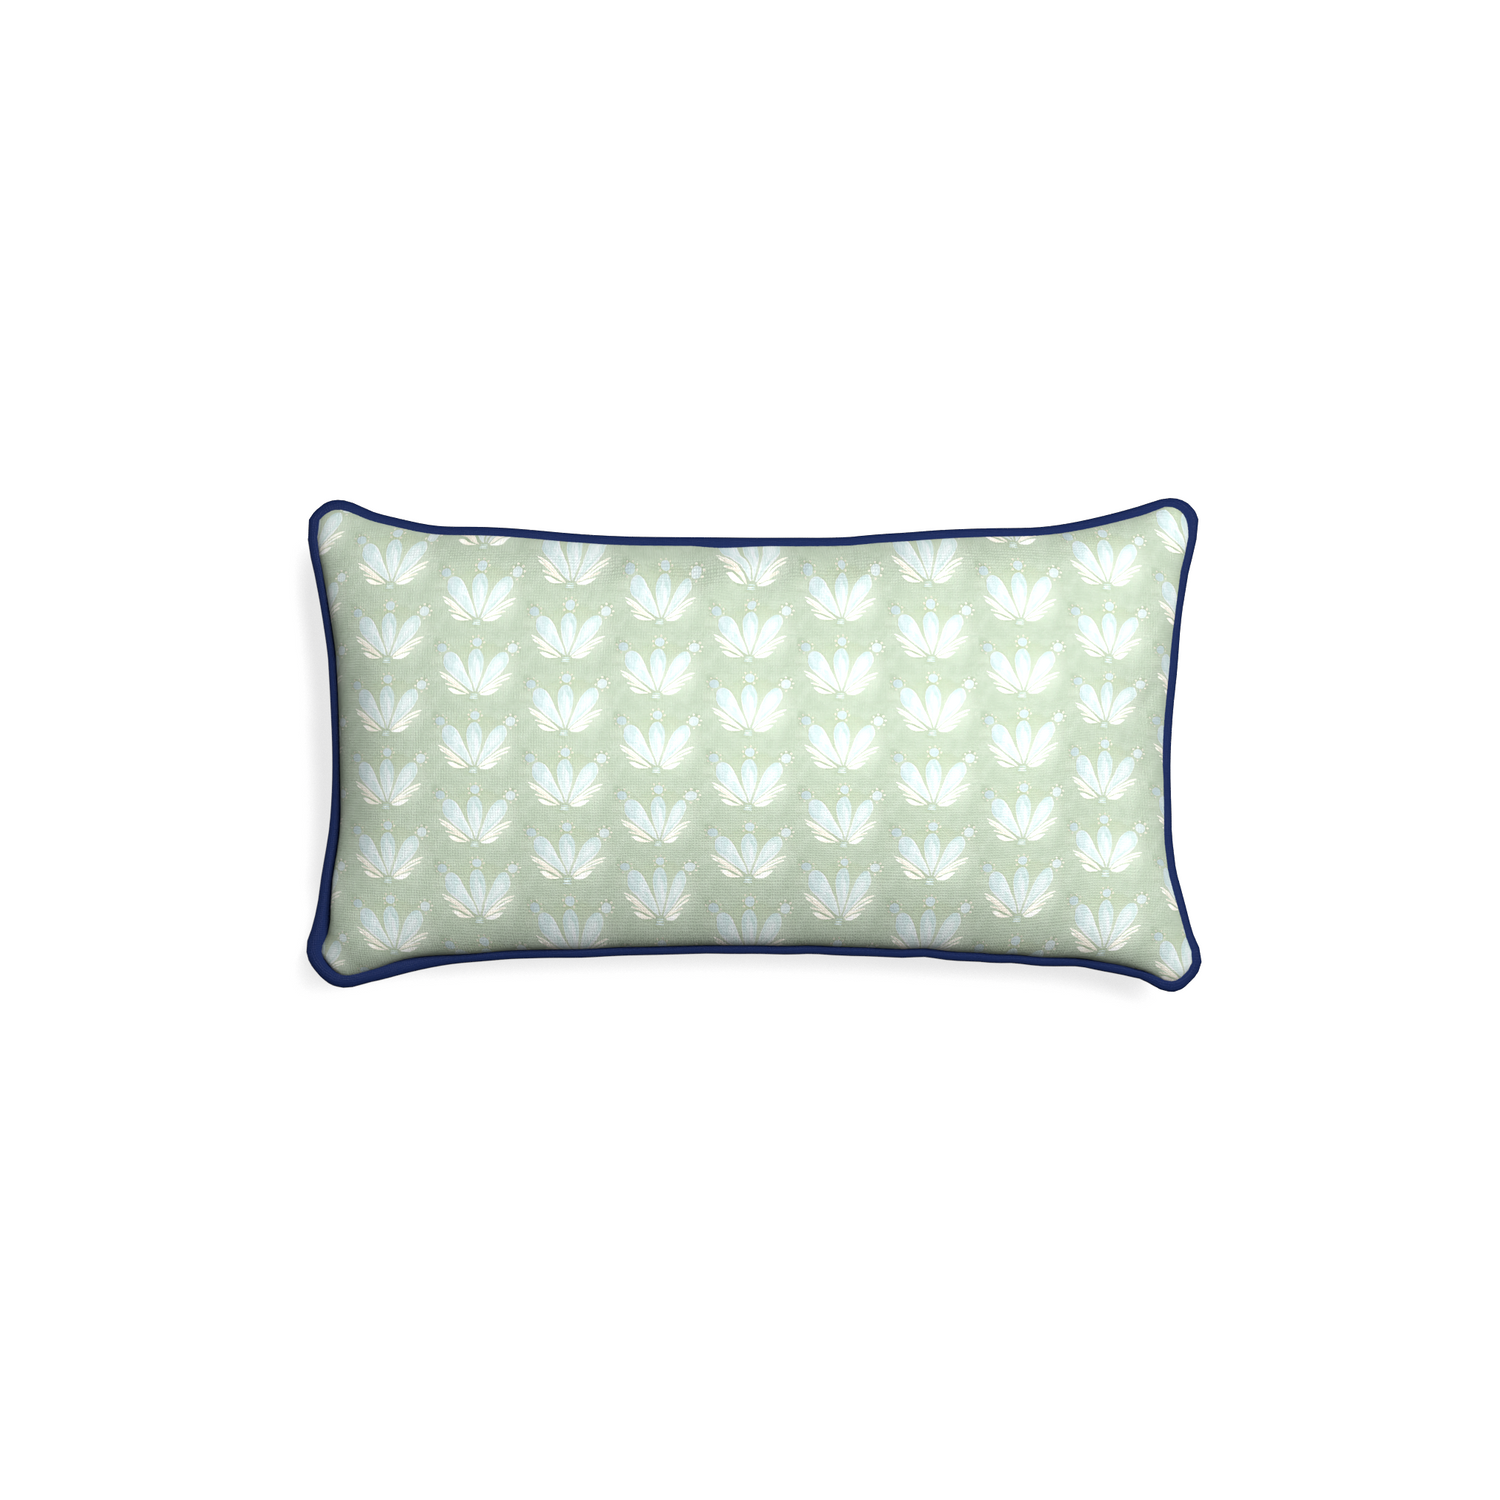 Petite-lumbar serena sea salt custom blue & green floral drop repeatpillow with midnight piping on white background